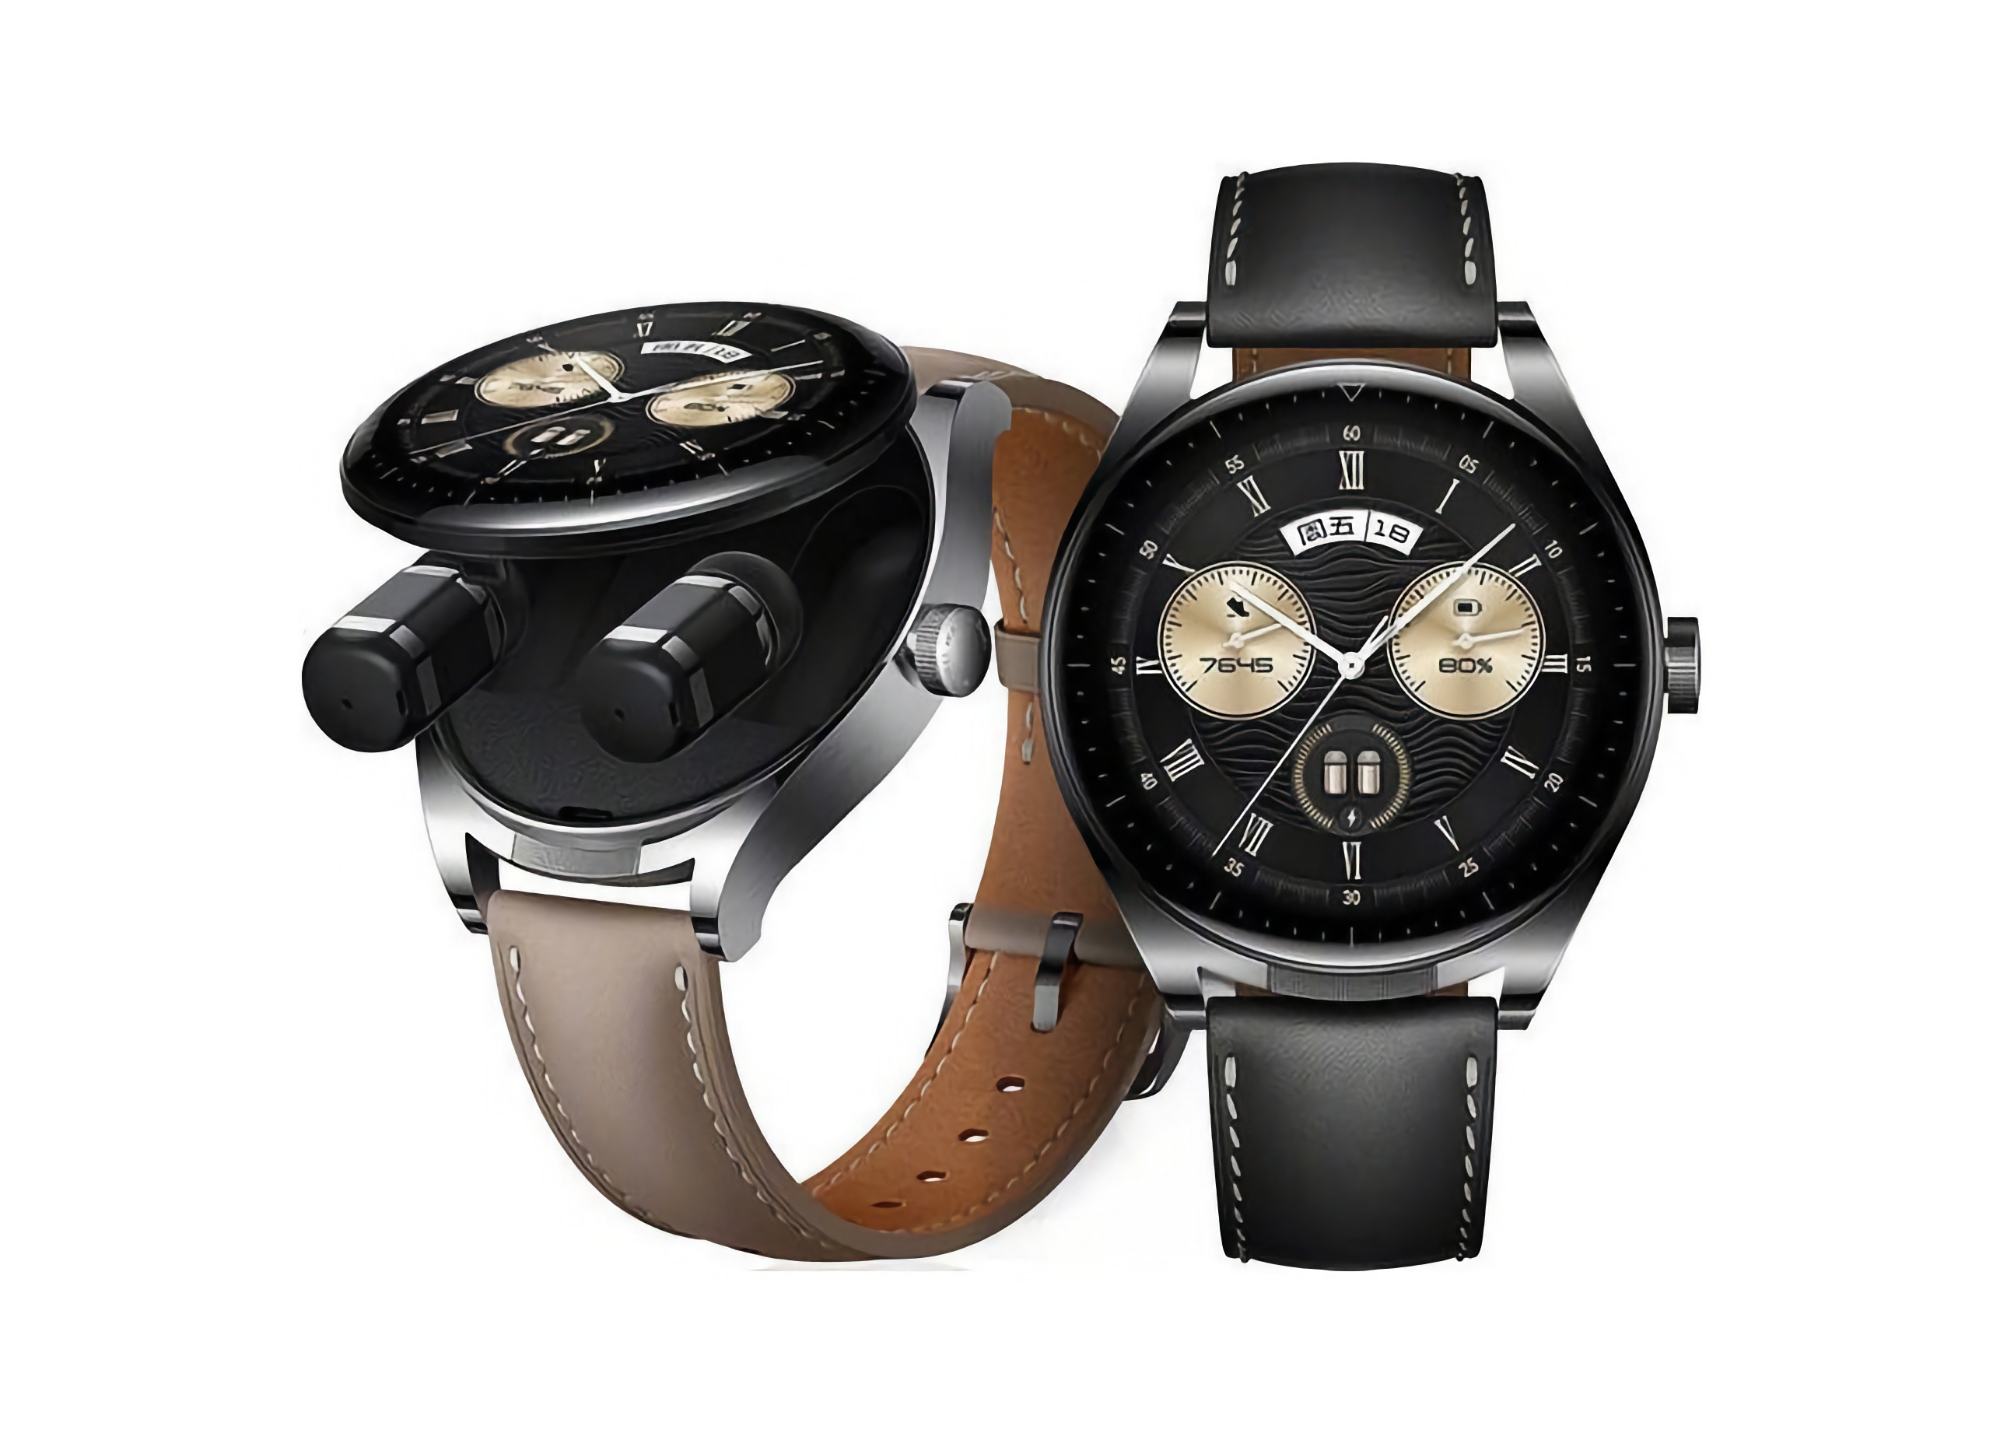 Huawei Watch Buds in the global market have started receiving HarmonyOS 4